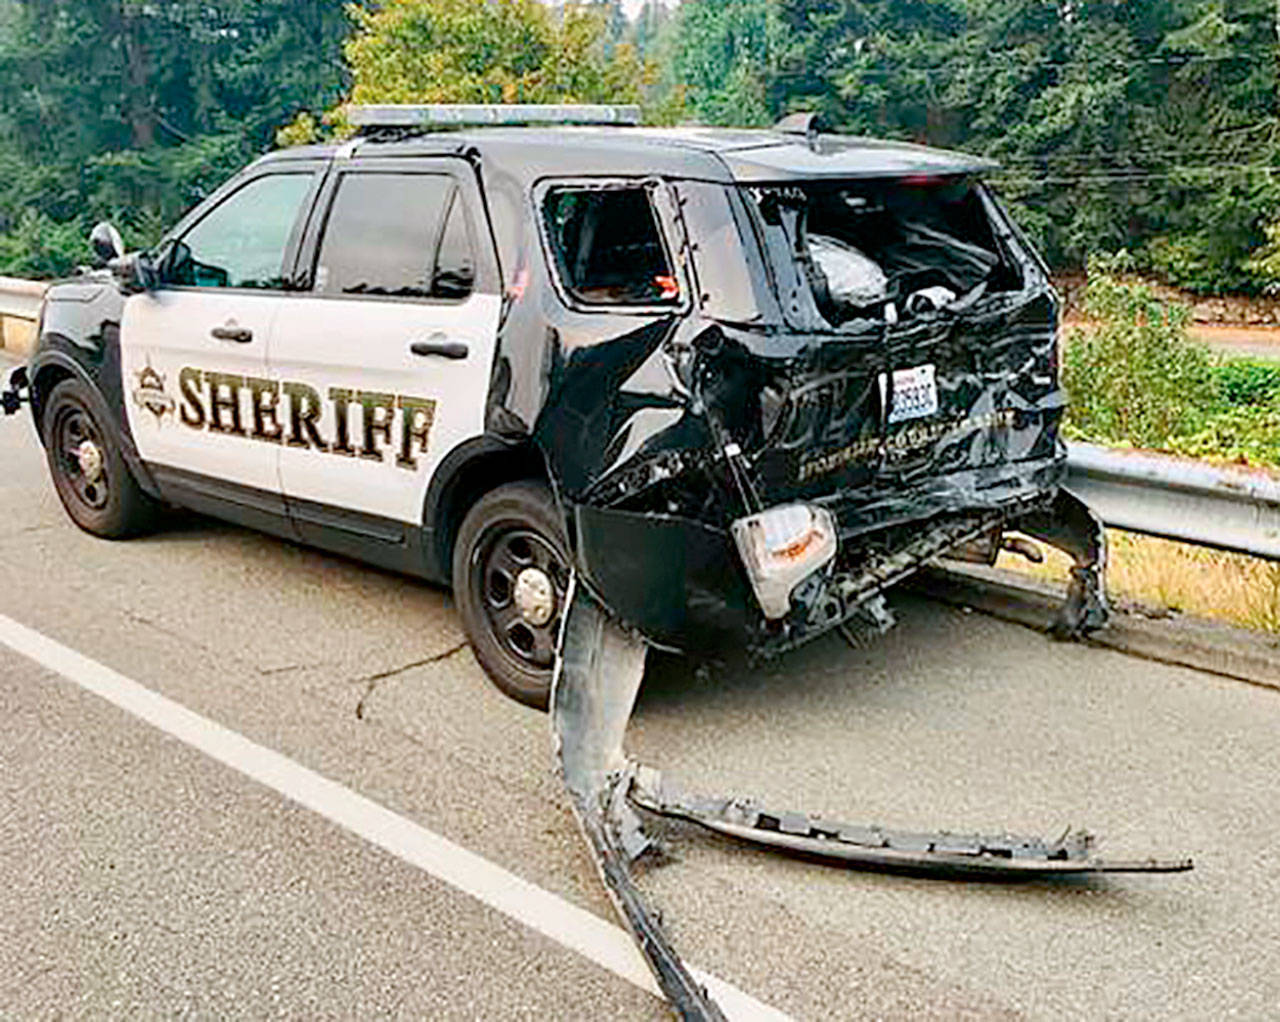 A Snohomish County sheriff’s patrol vehicle was allegedly rammed by a suspect in a stolen truck at the end of a cross-county pursuit. (Snohomish County Sheriff’s Office)